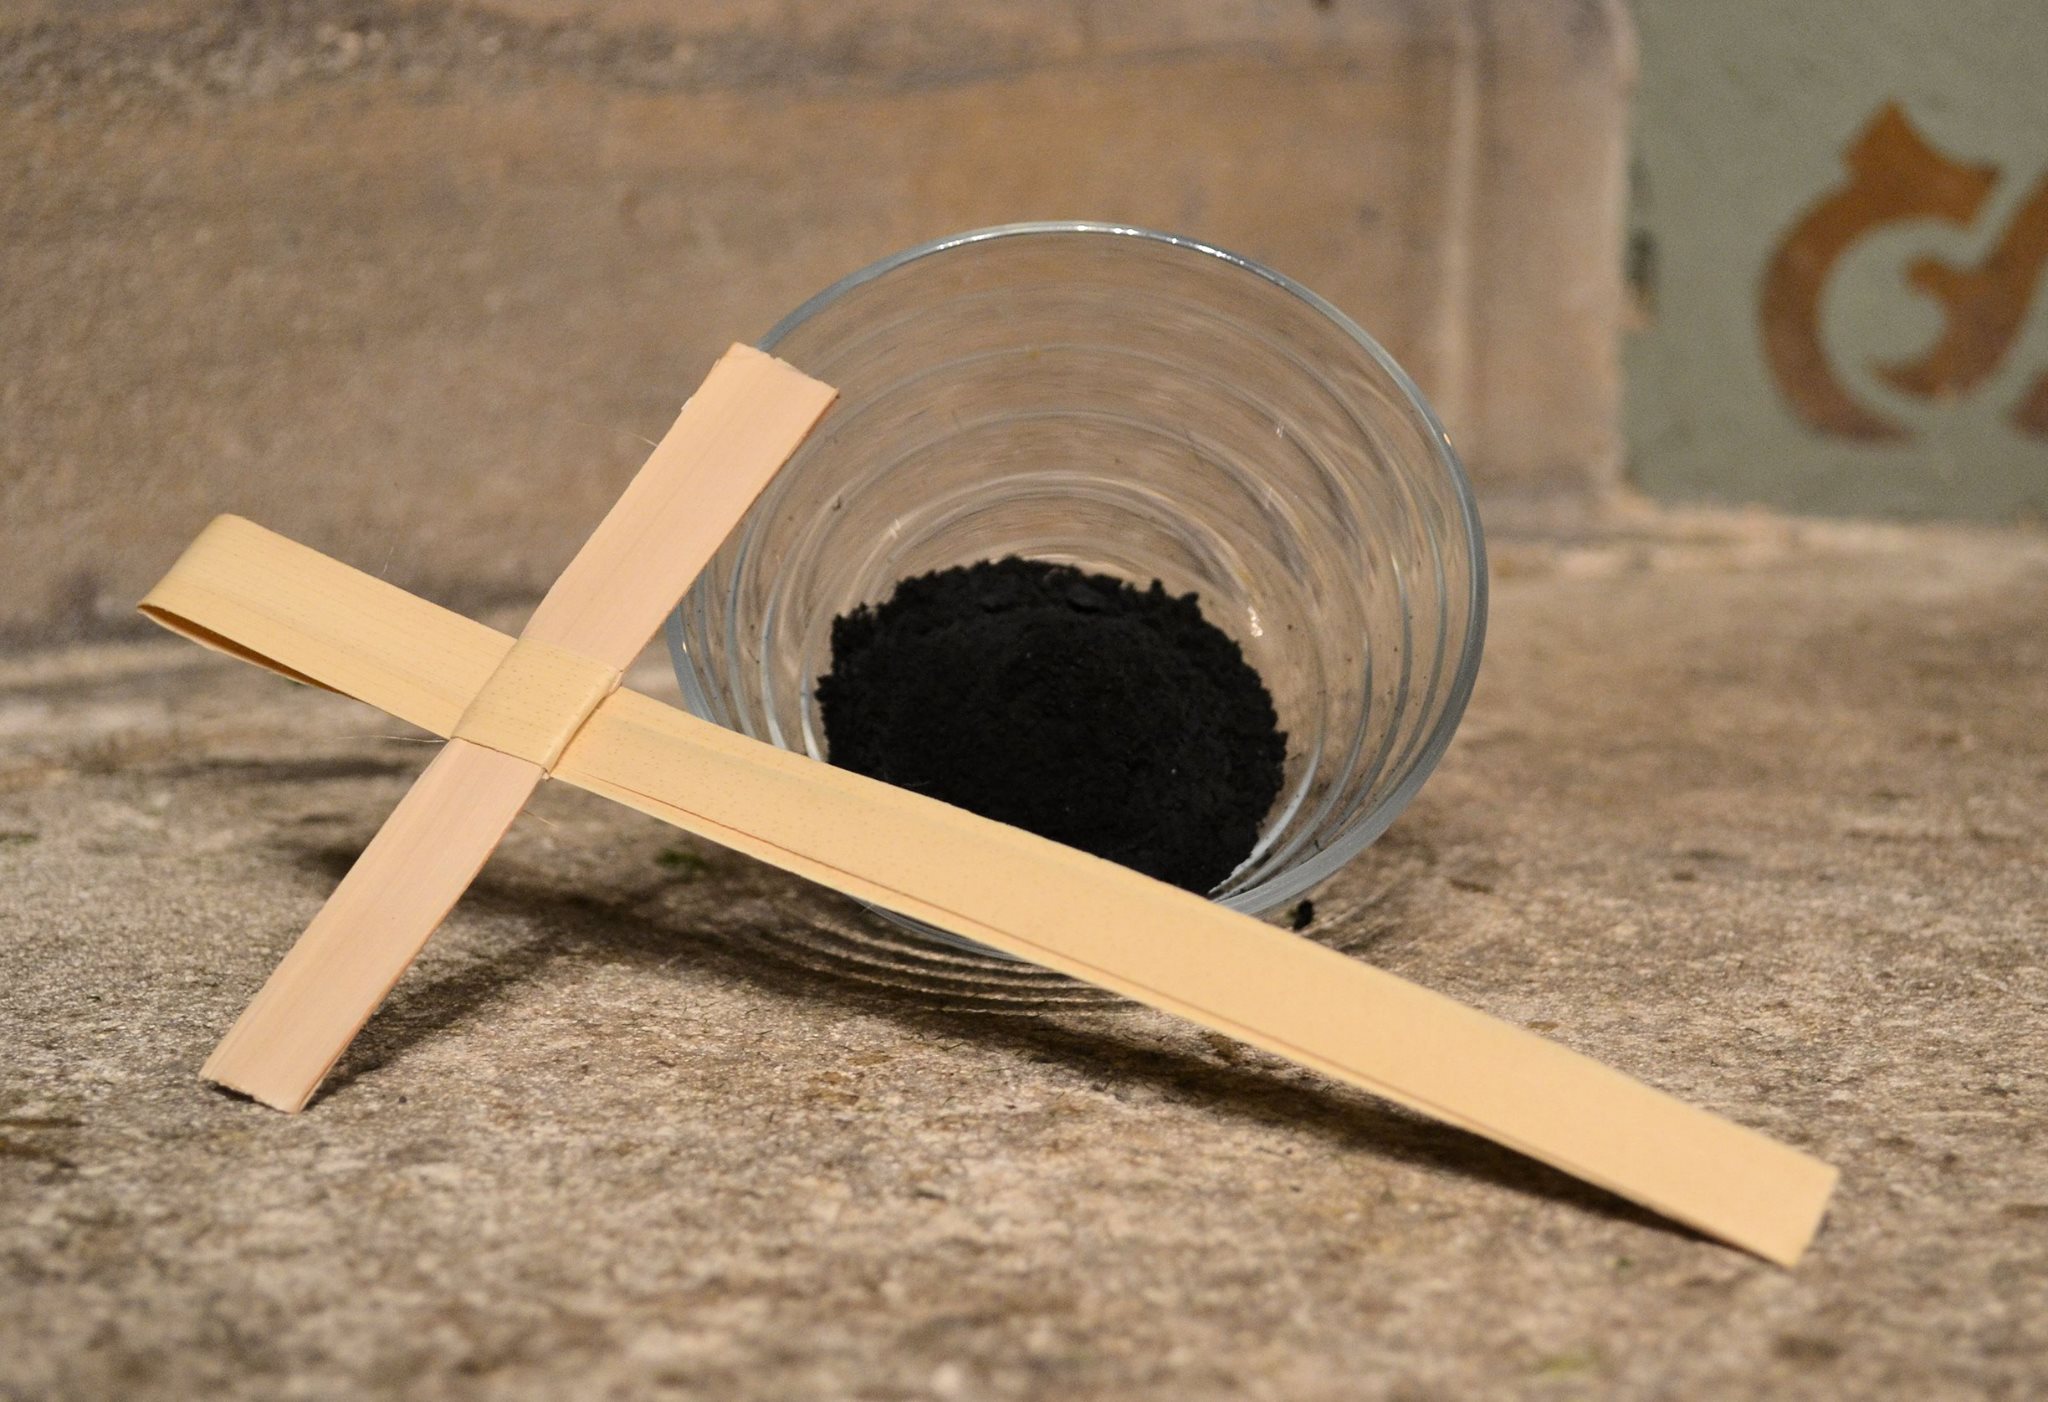 Making Ash for Ash Wednesday